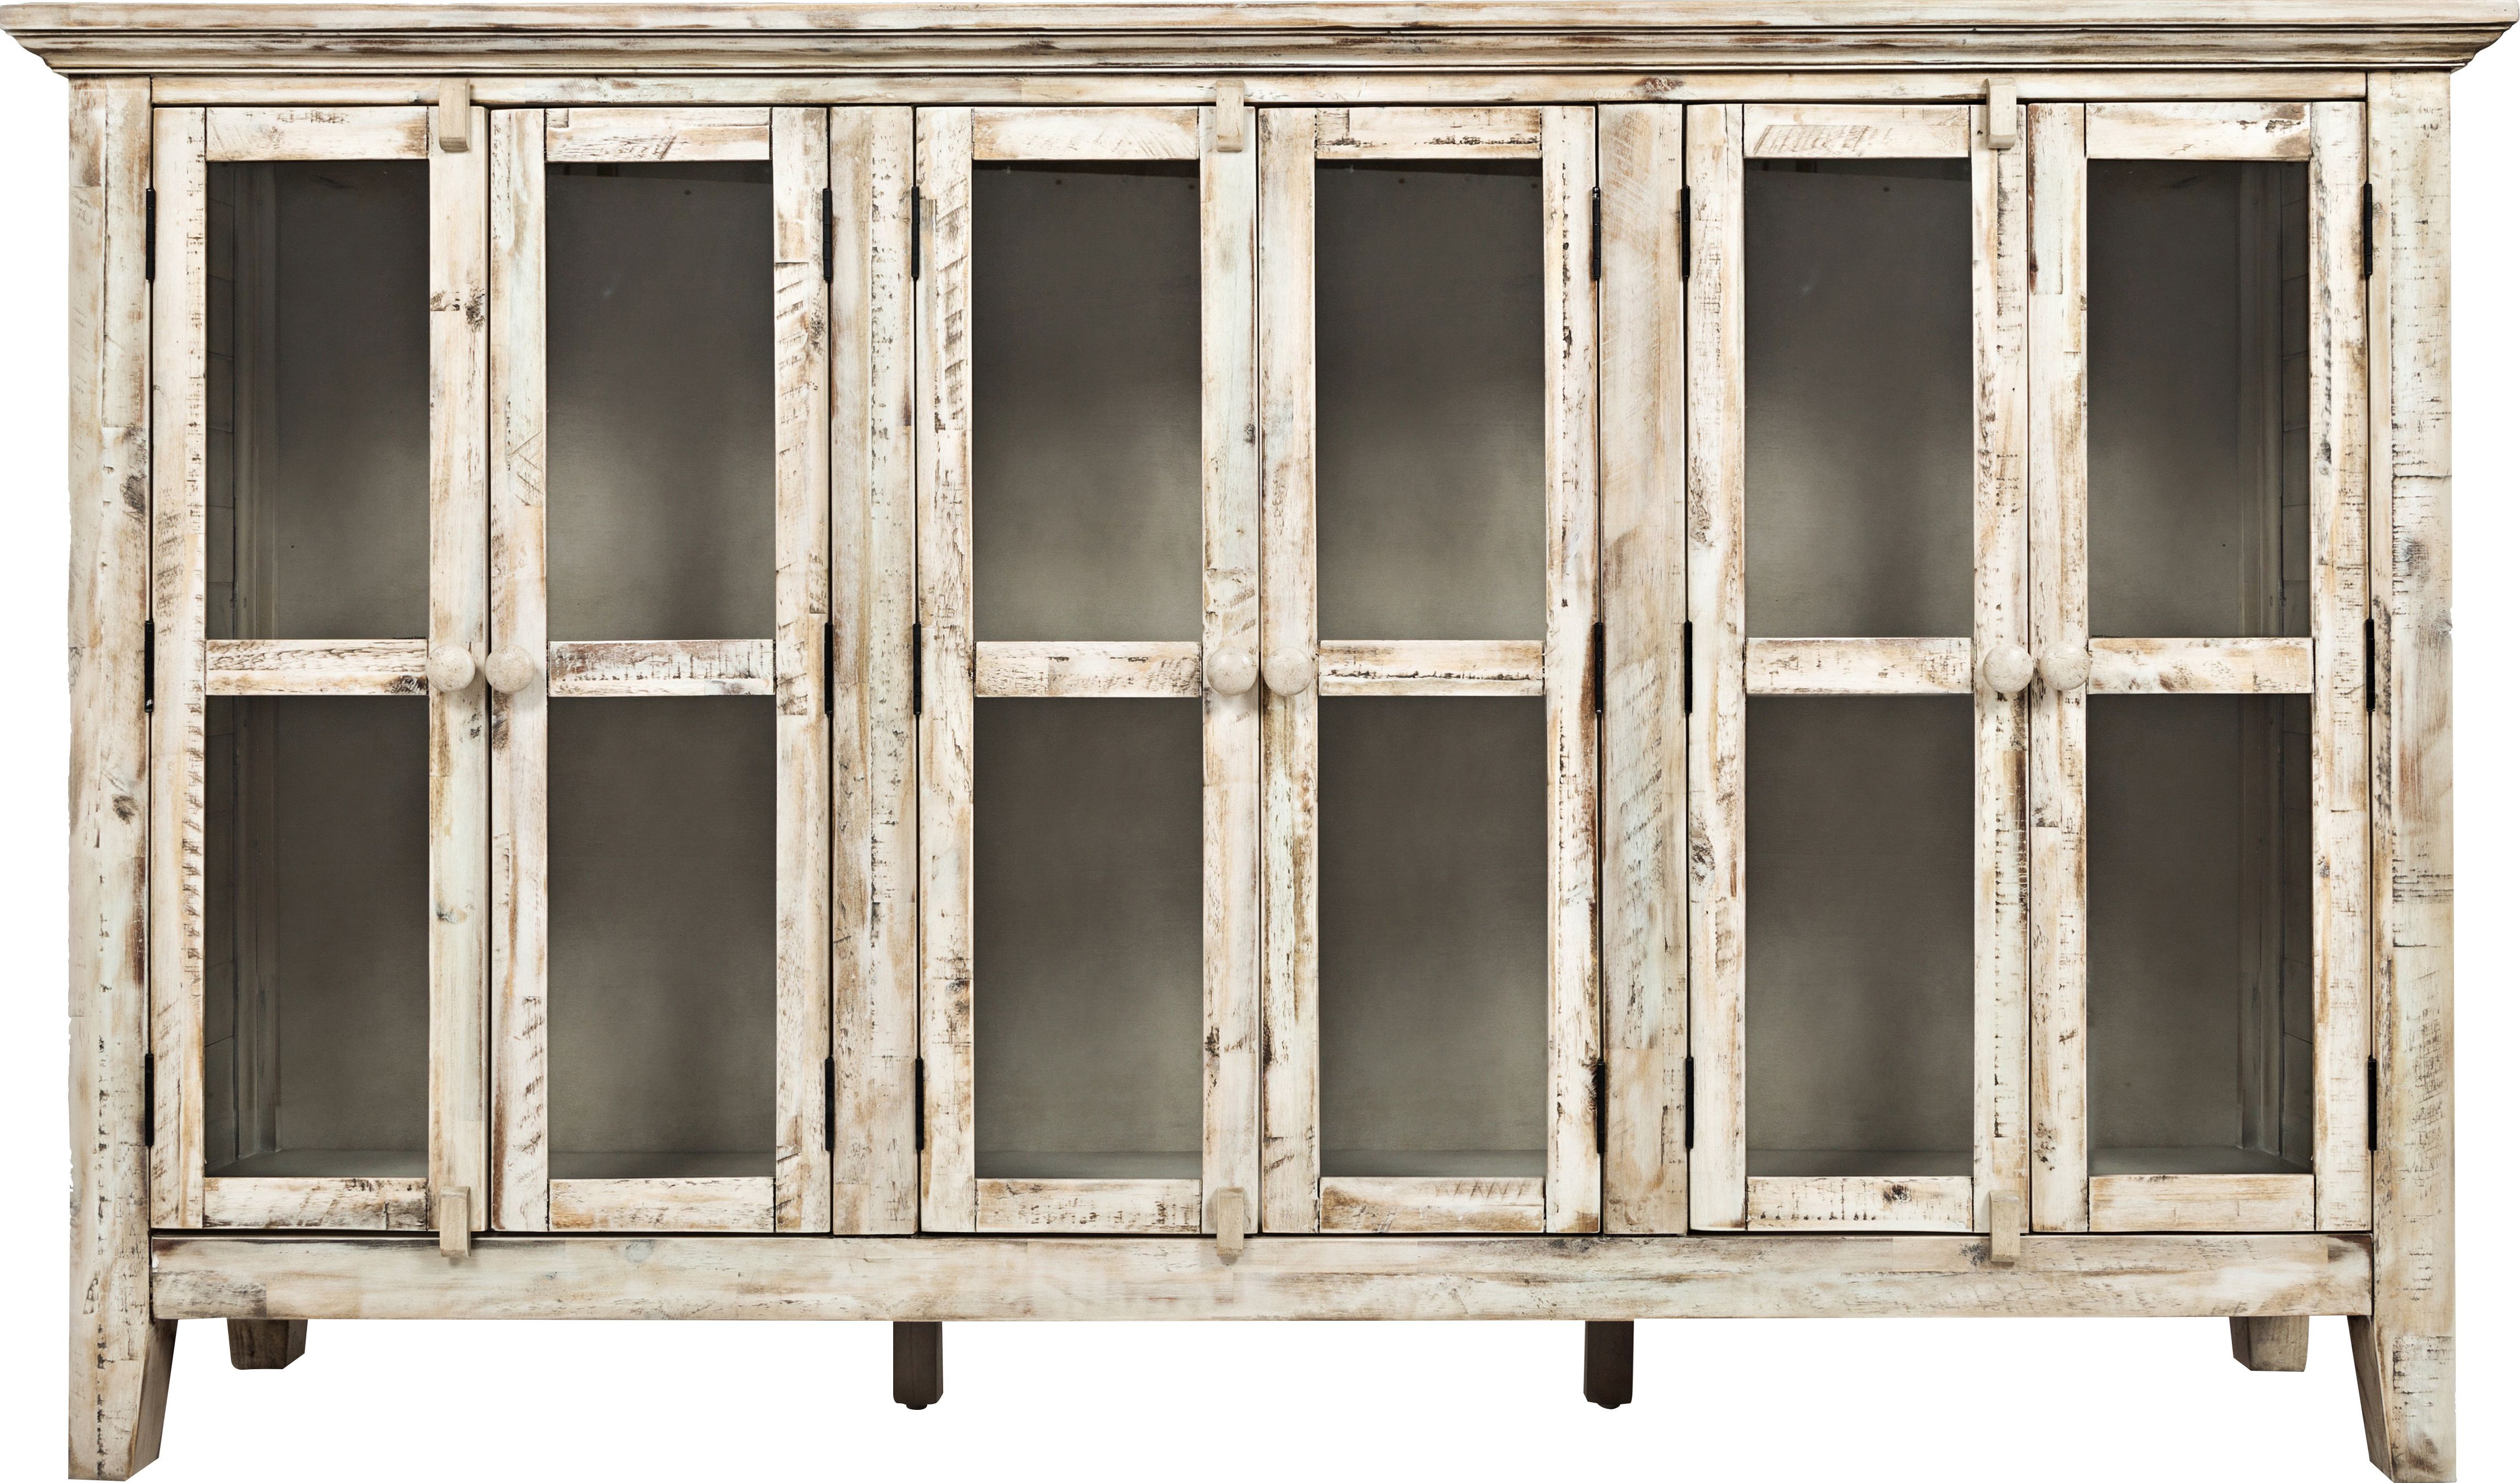 Farmhouse & Rustic Accent Chests & Cabinets | Birch Lane Inside Wooden Curio Buffets With Two Glass Doors (View 15 of 20)